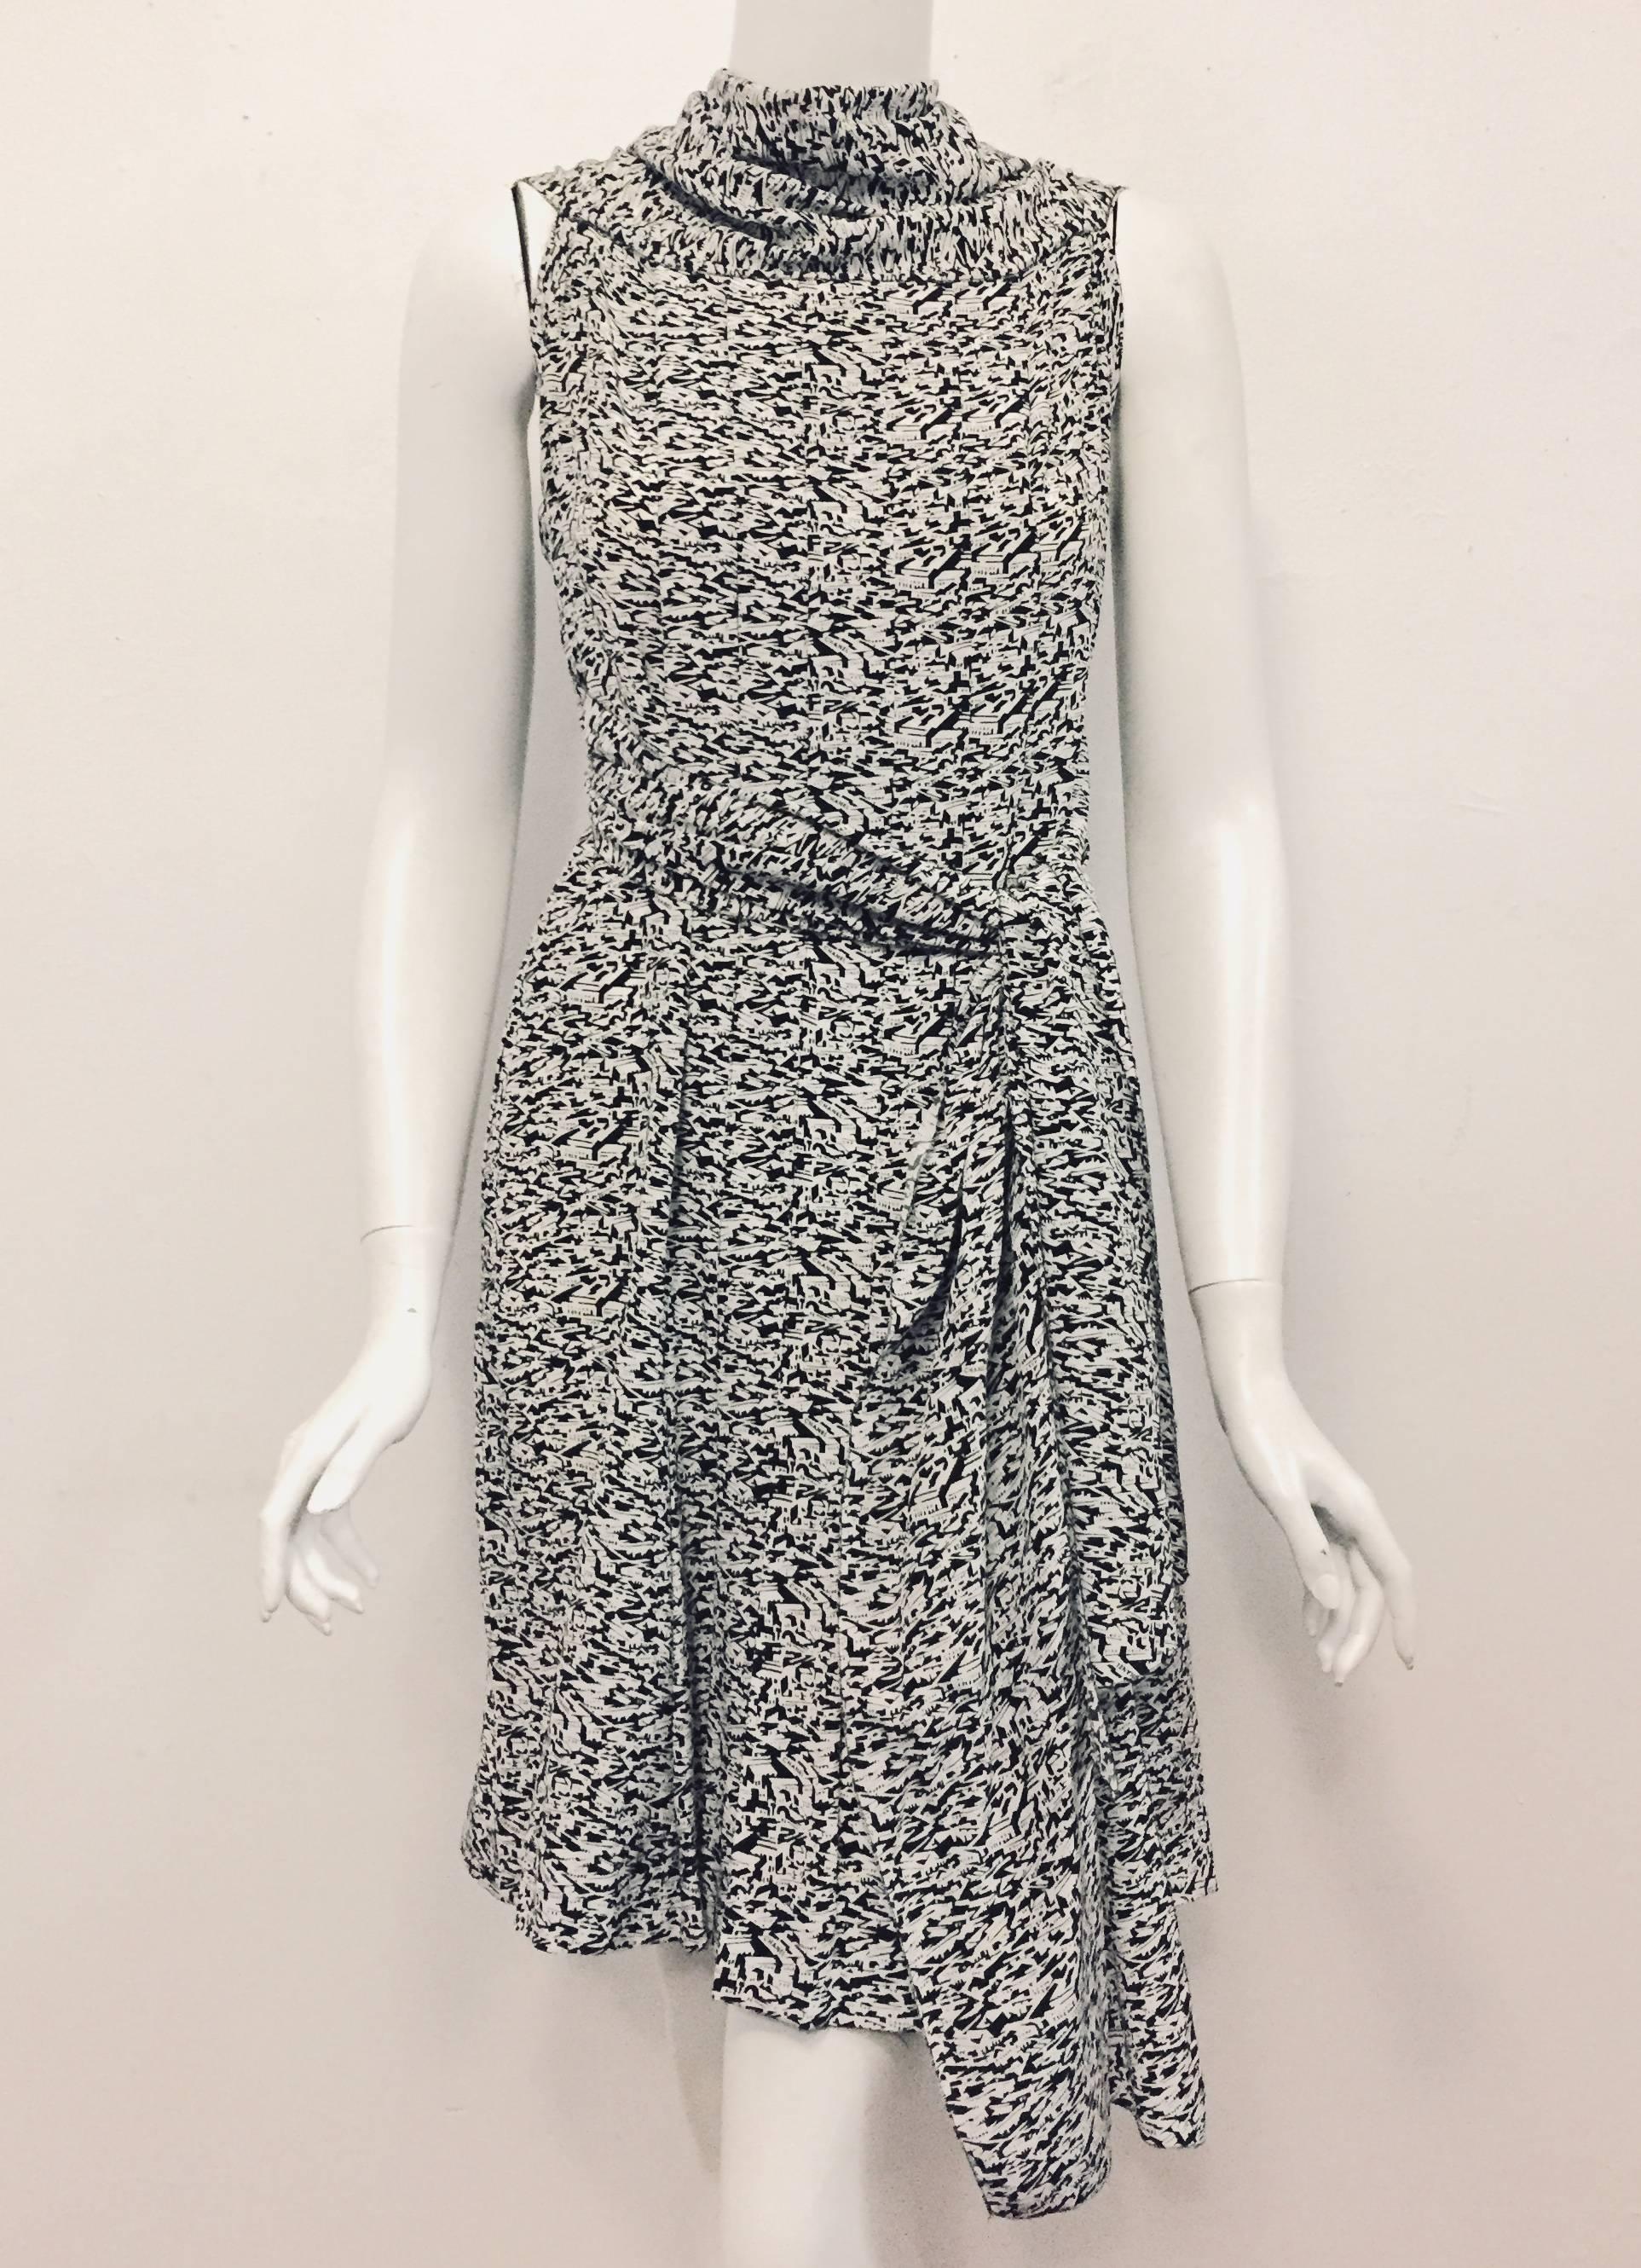 This Chanel innovate city skyline print dress in black and white silk with attached scarf that can be worn in various ways is a great travel piece. The city skyline silk fabric will not wrinkle and it also has the CHANEL name written allover the